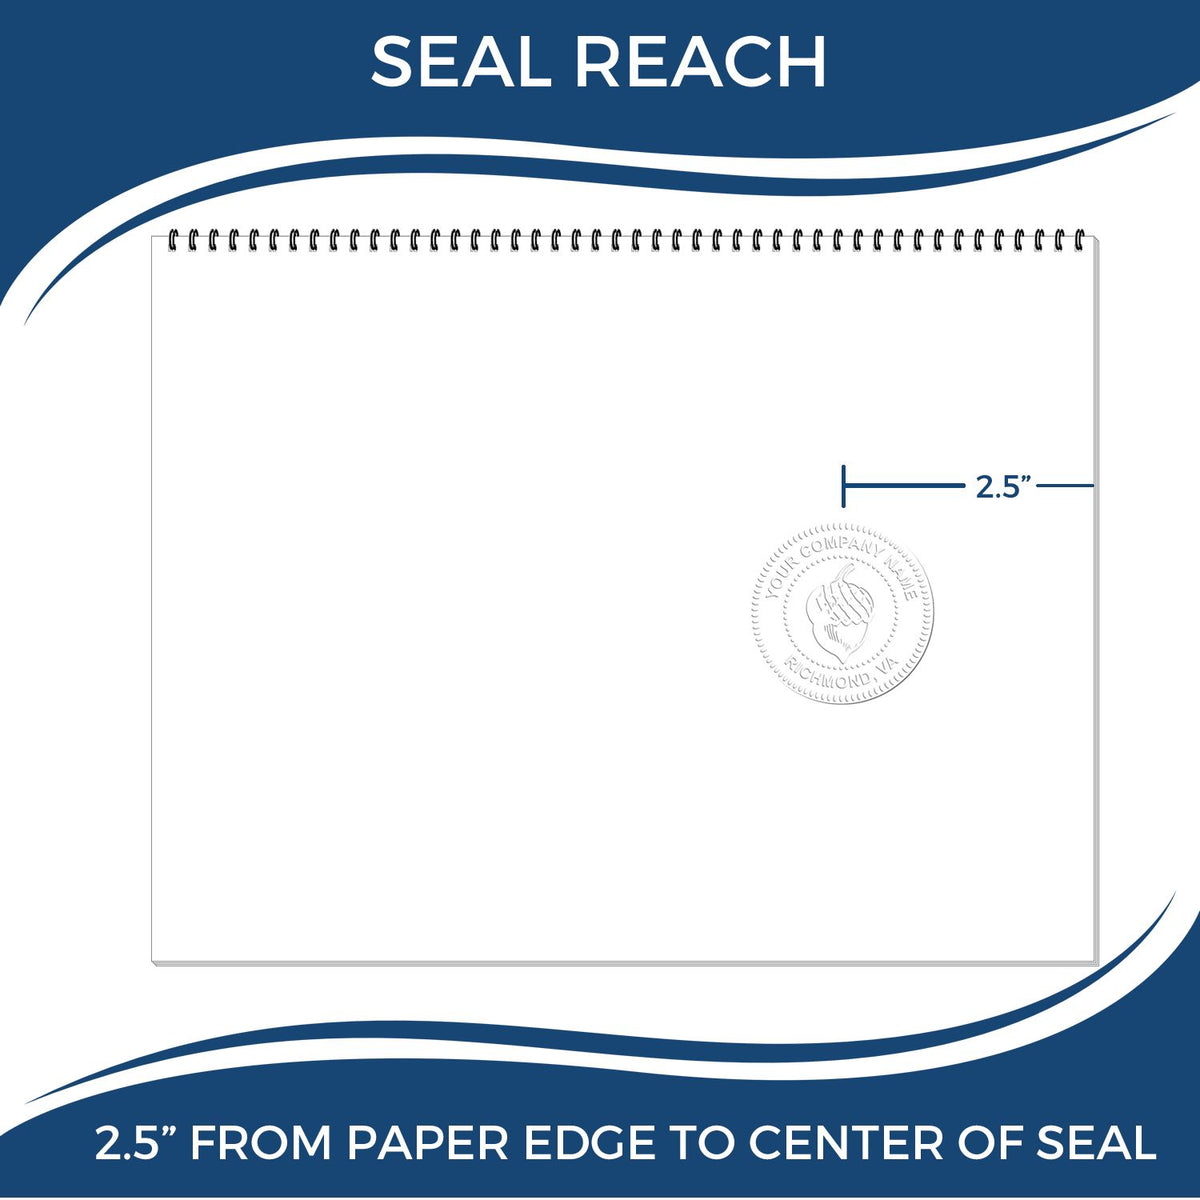 An infographic showing the seal reach which is represented by a ruler and a miniature seal image of the Heavy Duty Cast Iron Kentucky Architect Embosser